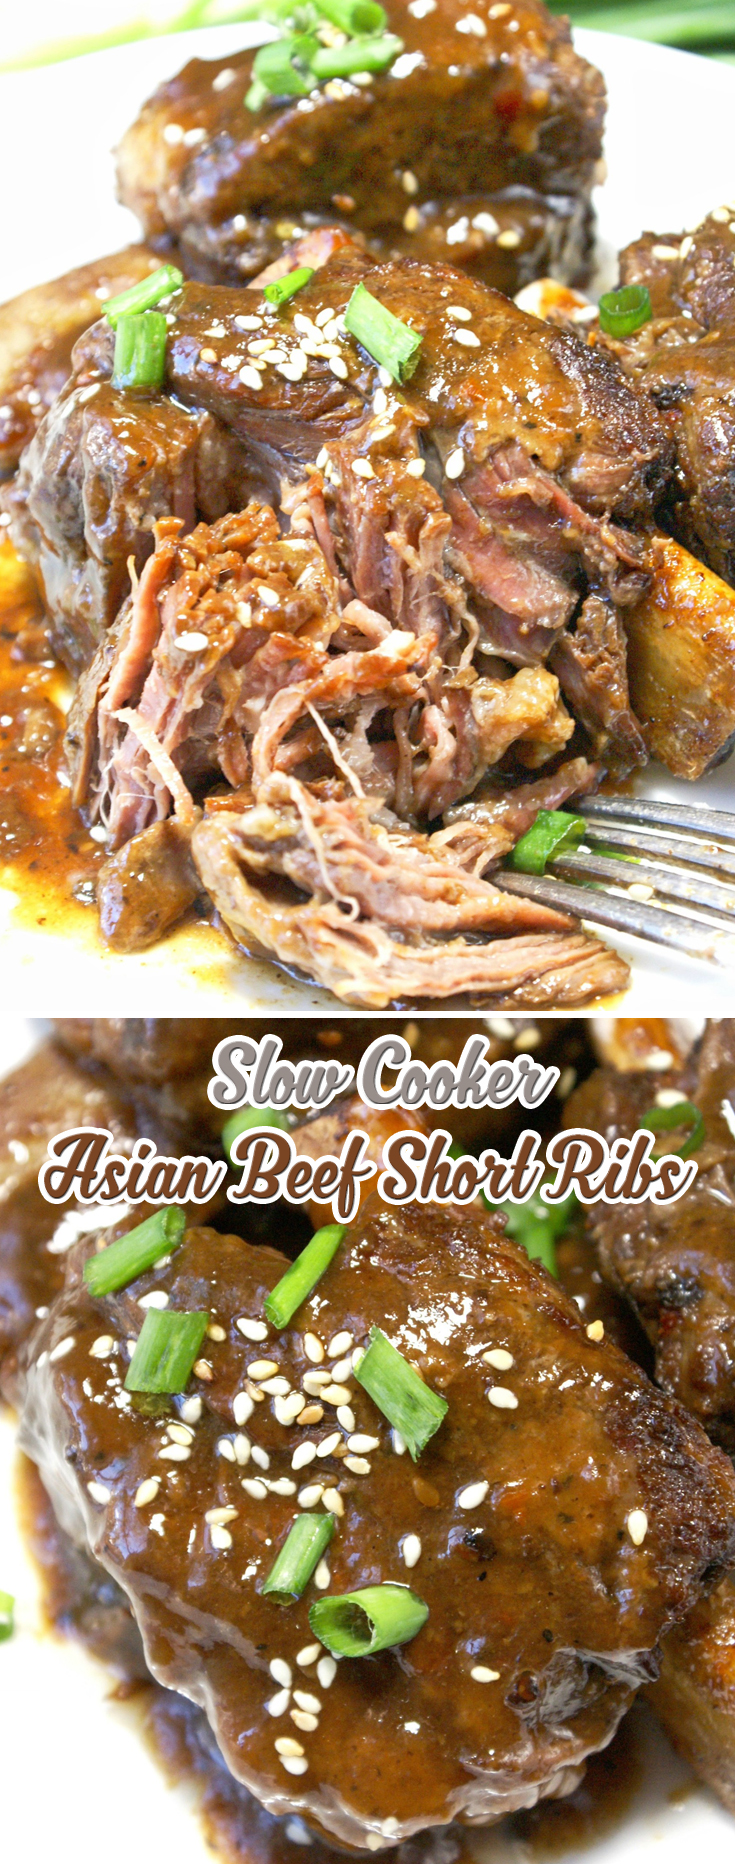 Slow Cooker Asian Beef Short Ribs